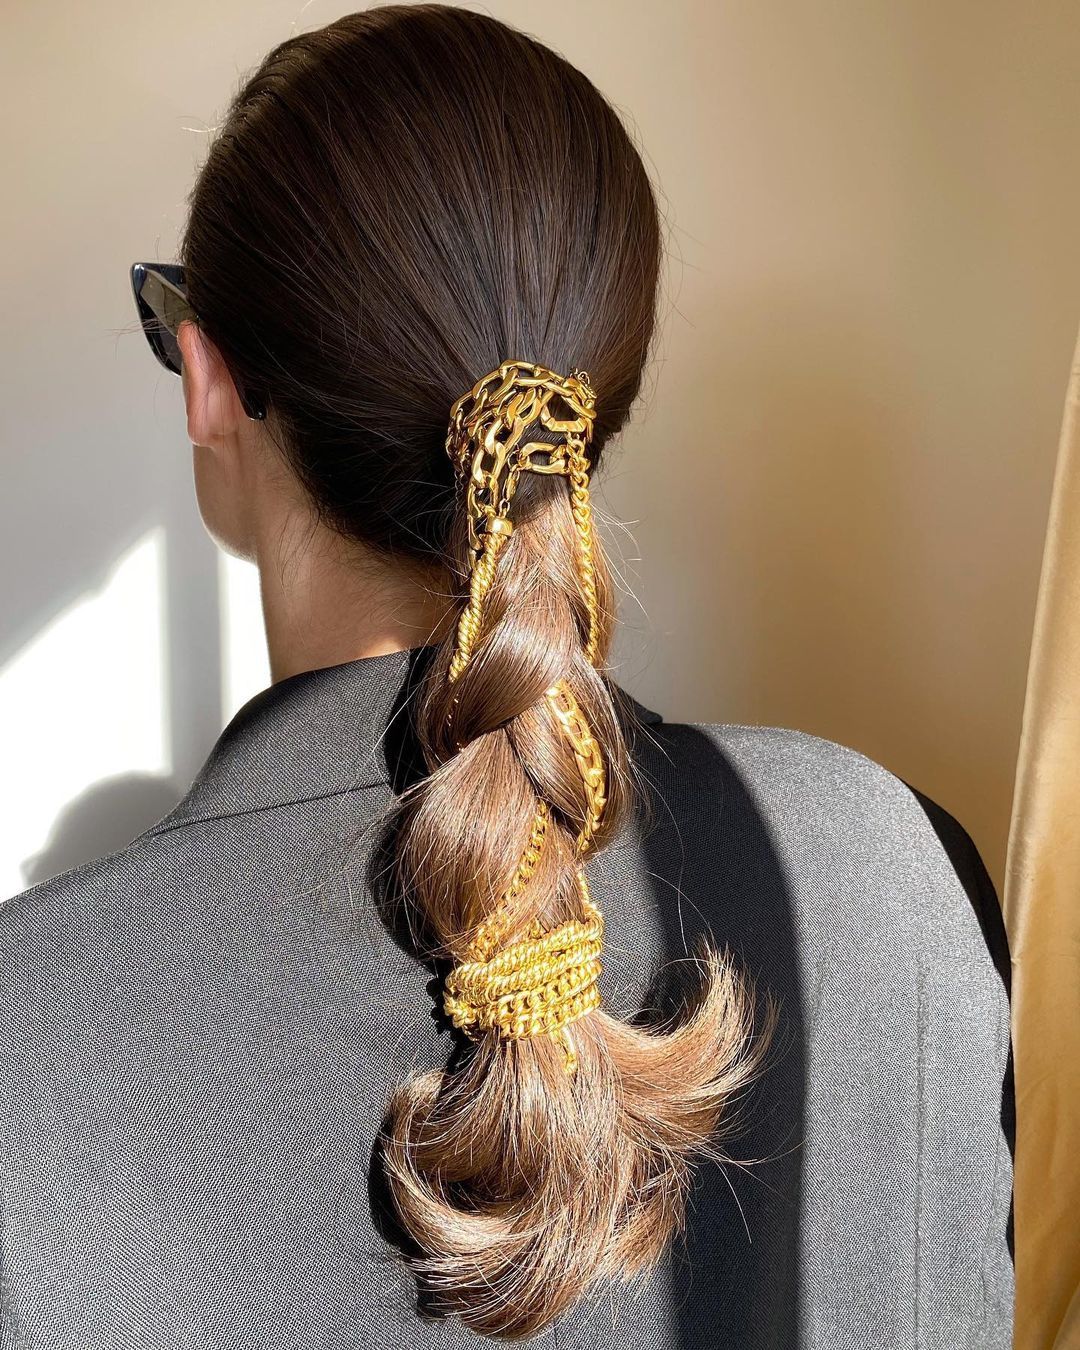 22 Hairstyles for Dirty Hair (Because Washing Isn't Always an Option)